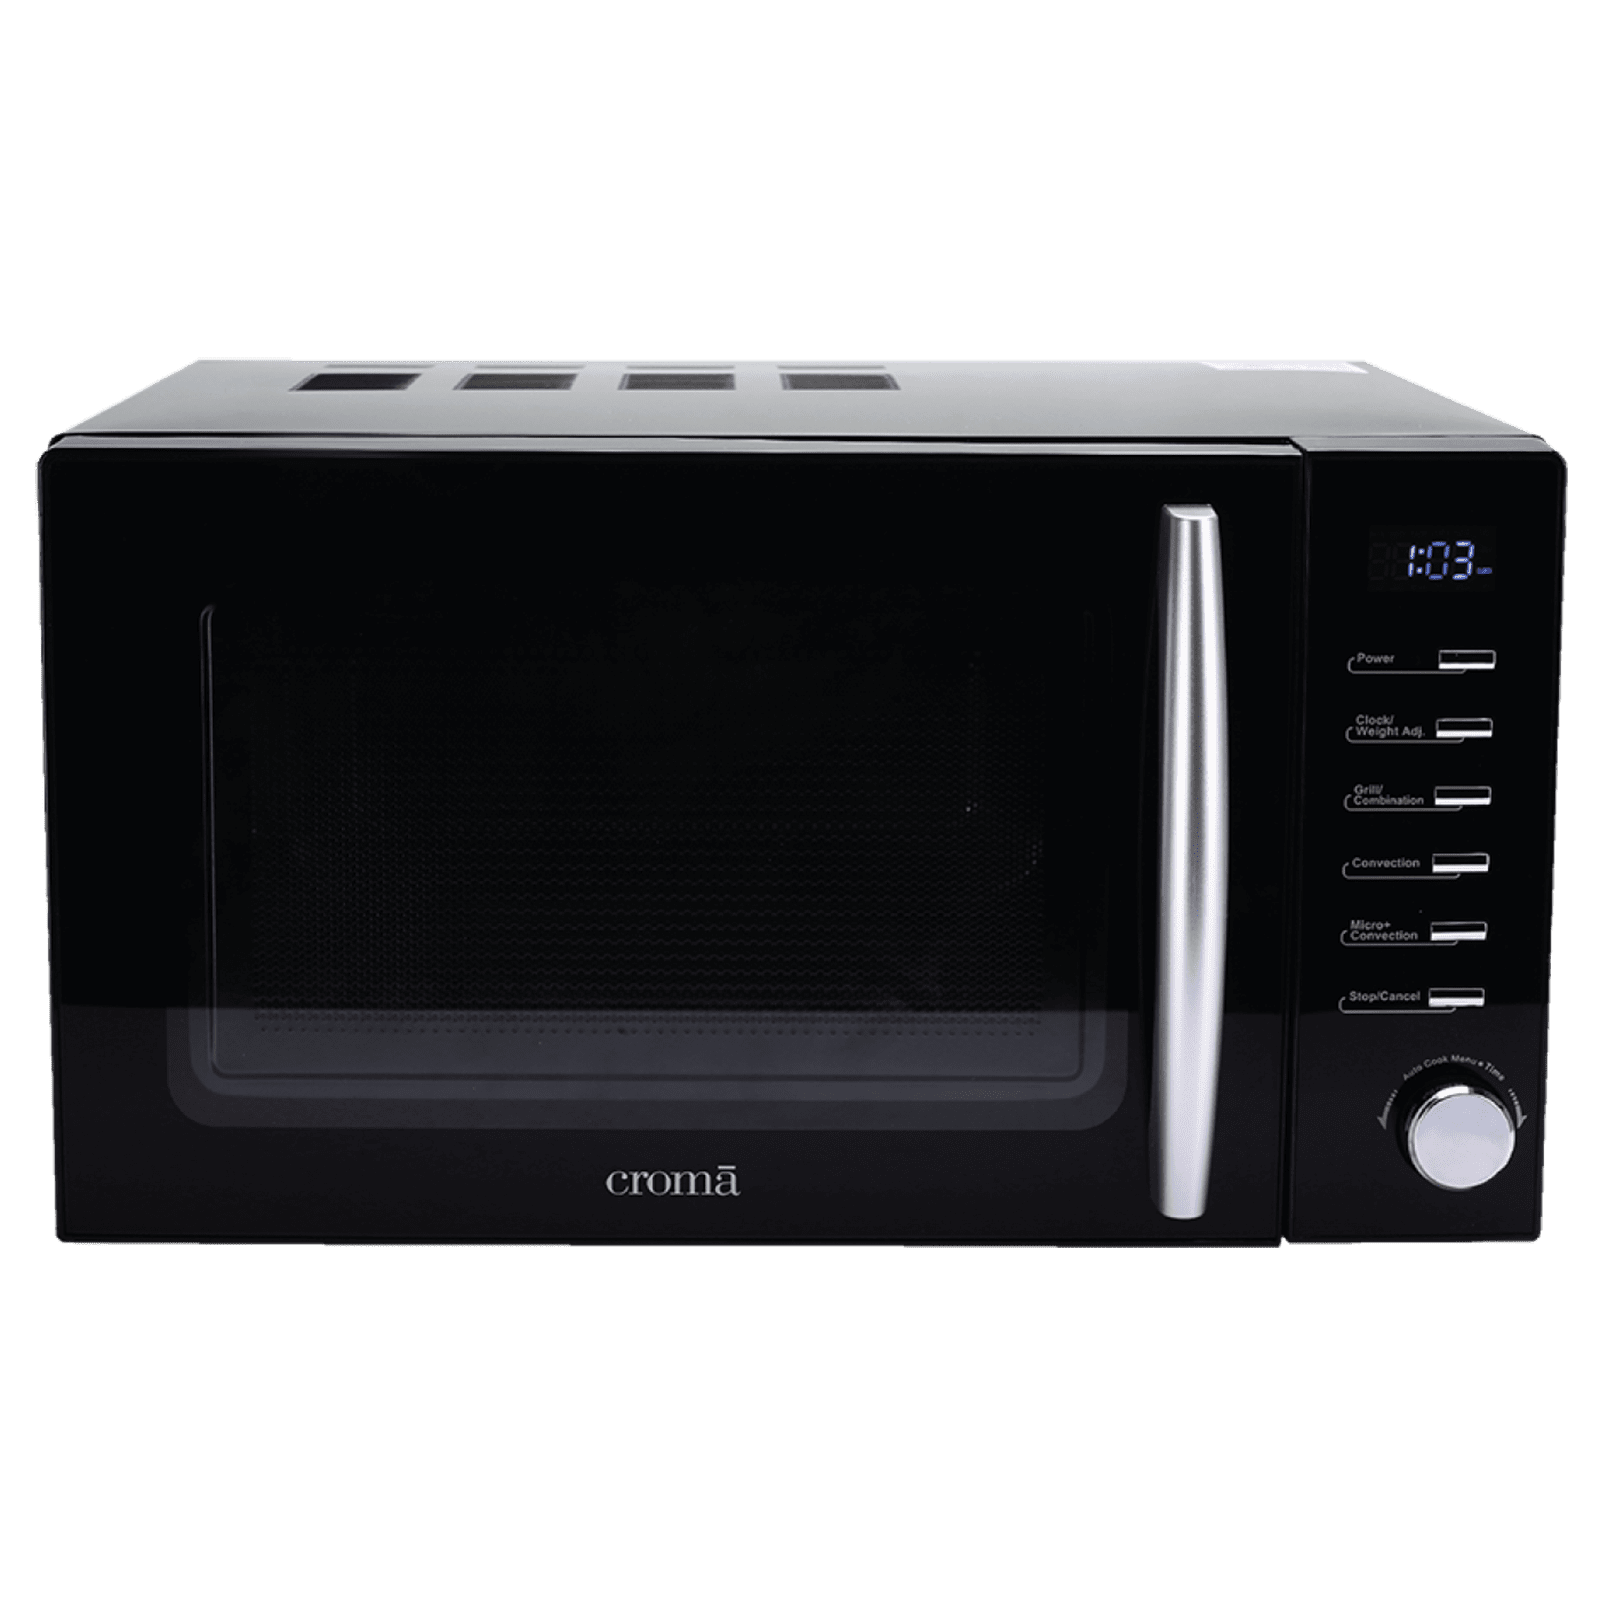 Croma 20 Litres Convection Microwave Oven (Barbeque Function, CRAM0193, Black)